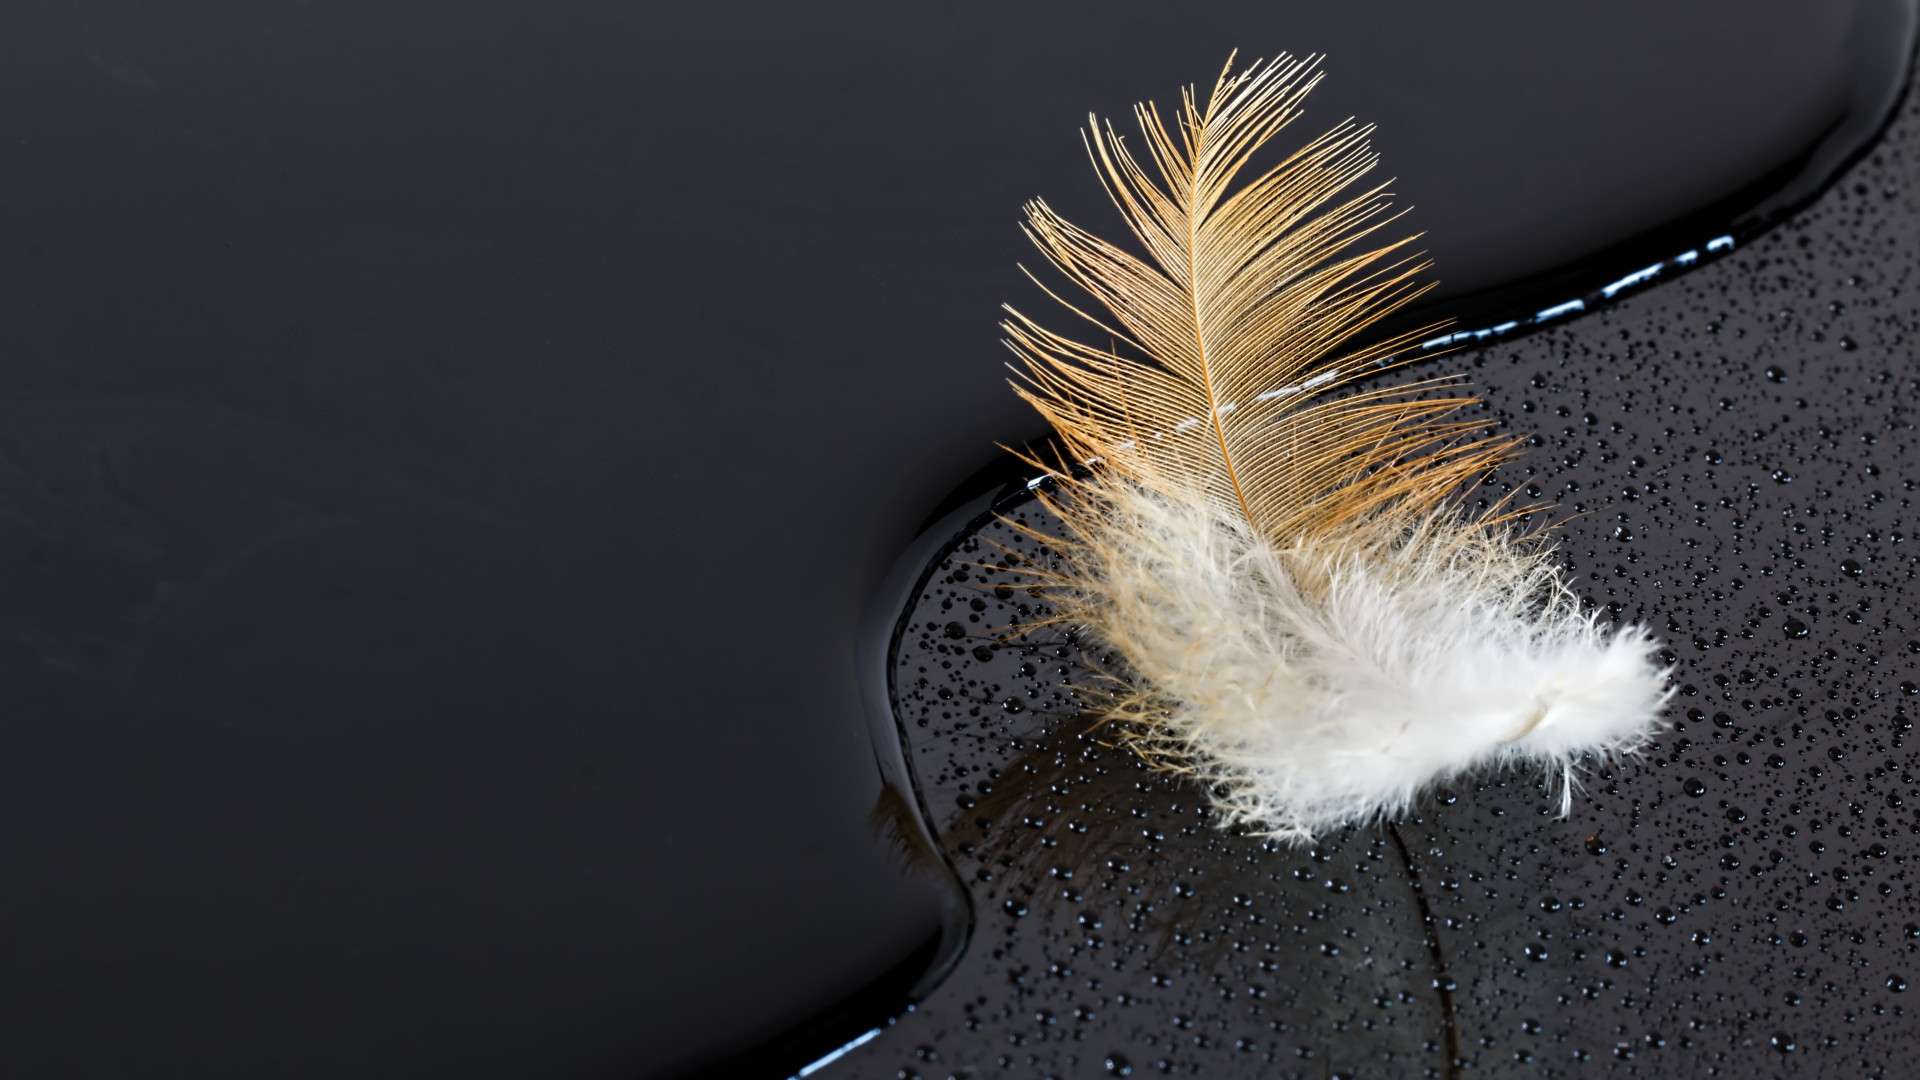 Dark surface with a feather on water wallpaper 1920x1080